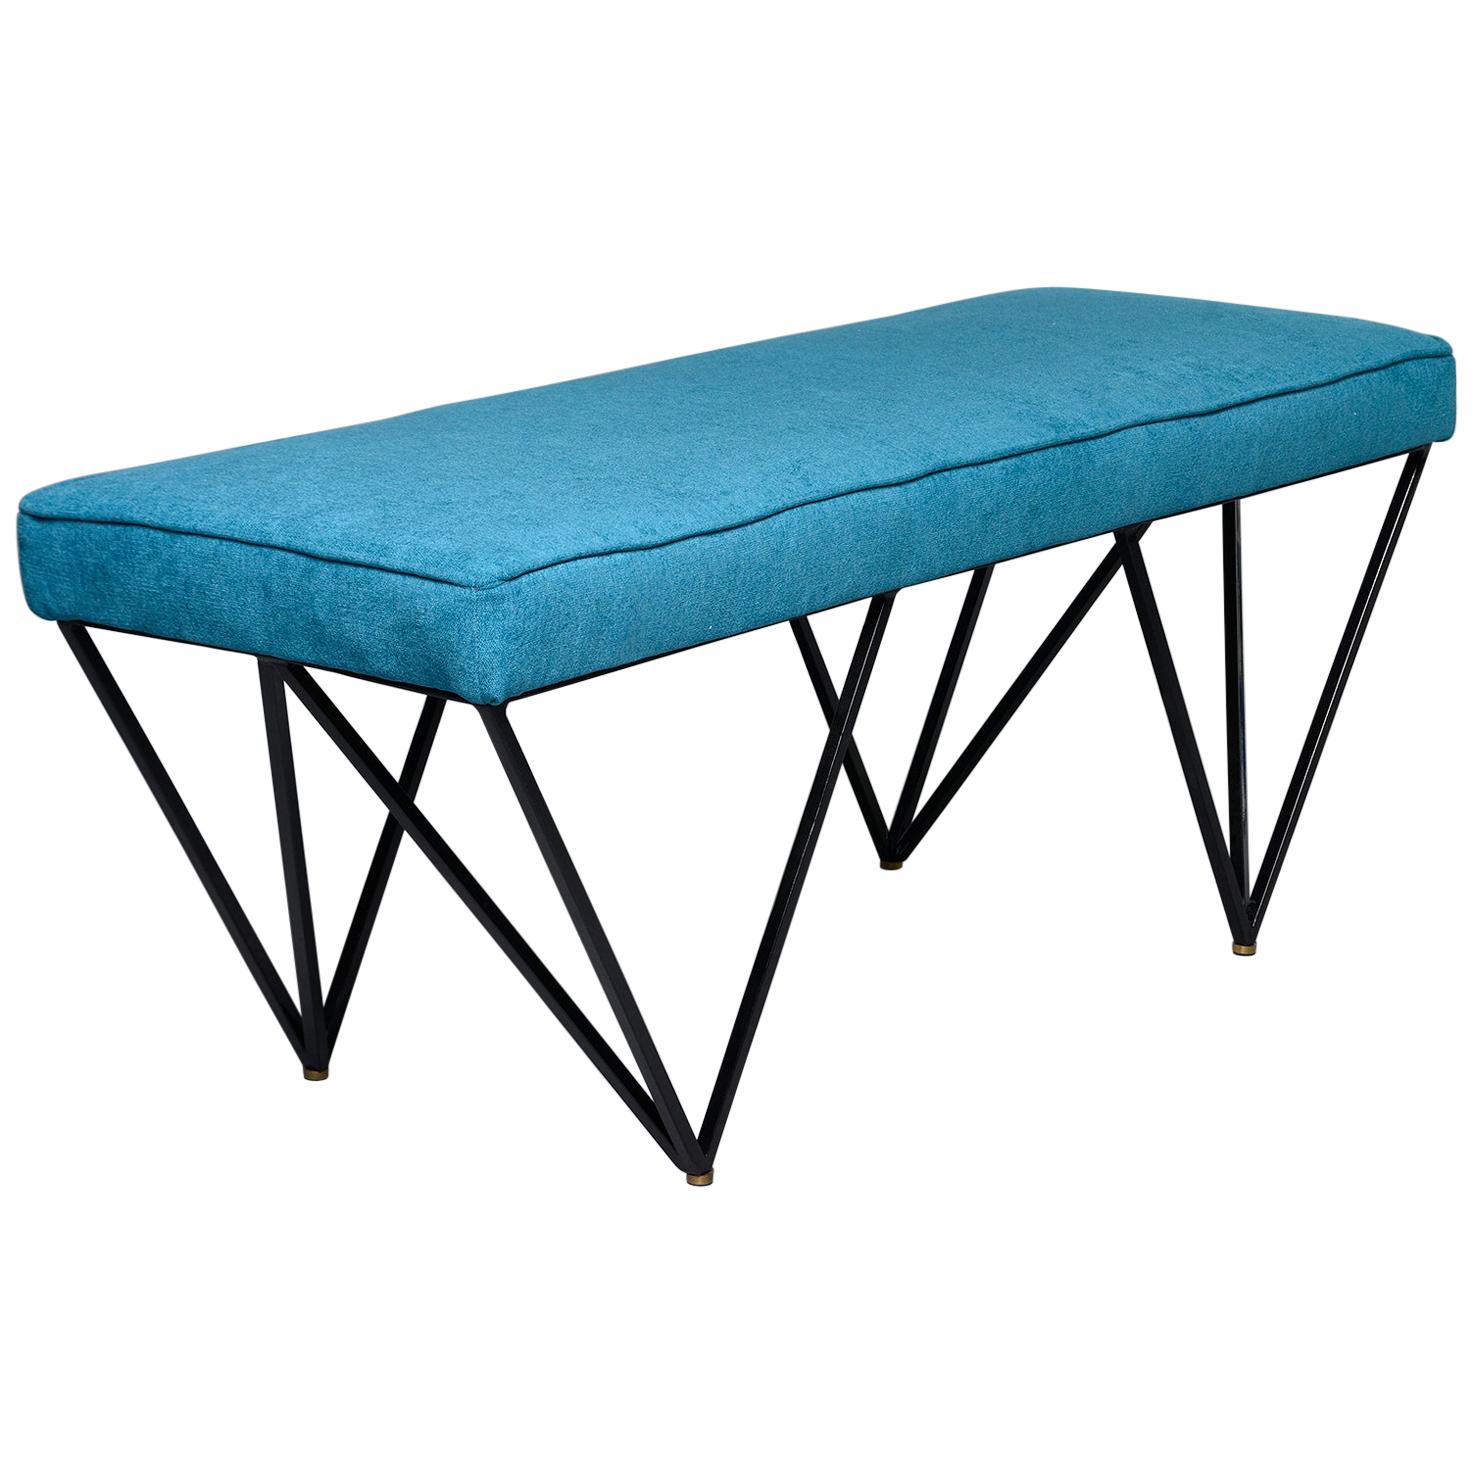 Italian Midcentury Style Bench with Teal Fabric and Black Metal Legs